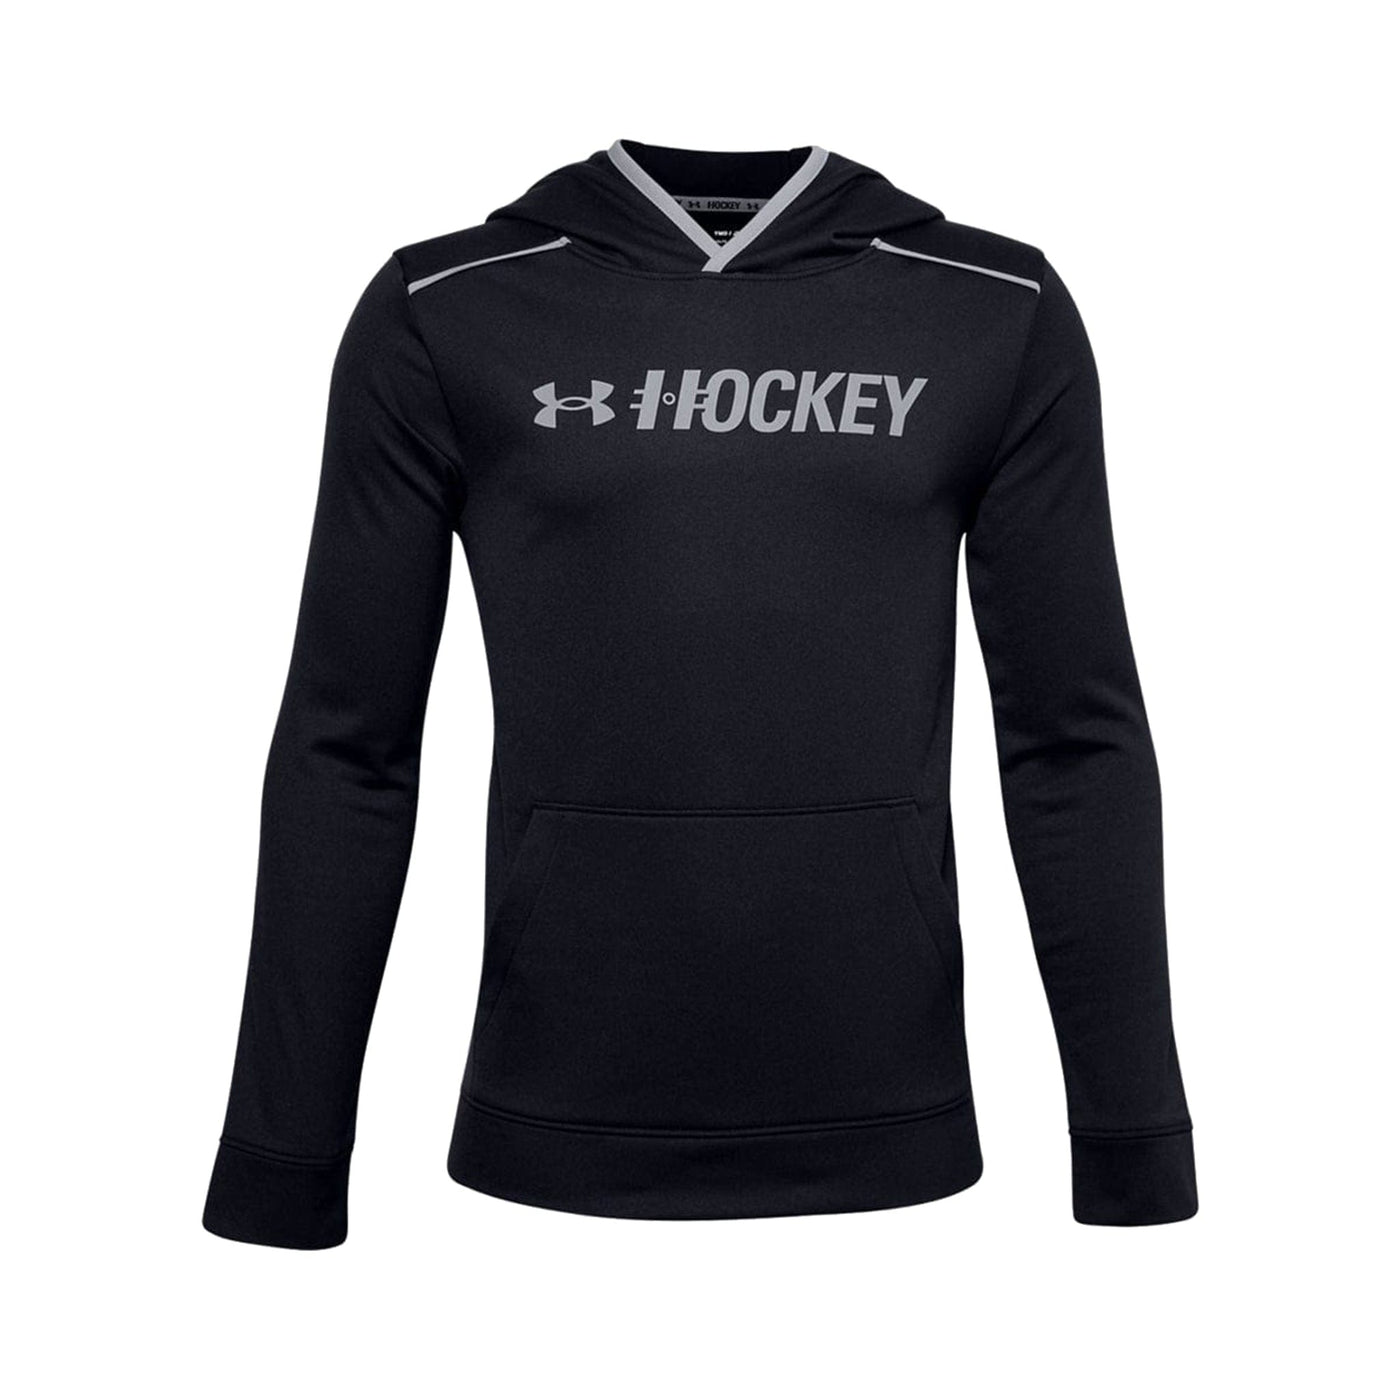 Under Armour Hockey Graphic Junior Hoodie - The Hockey Shop Source For Sports